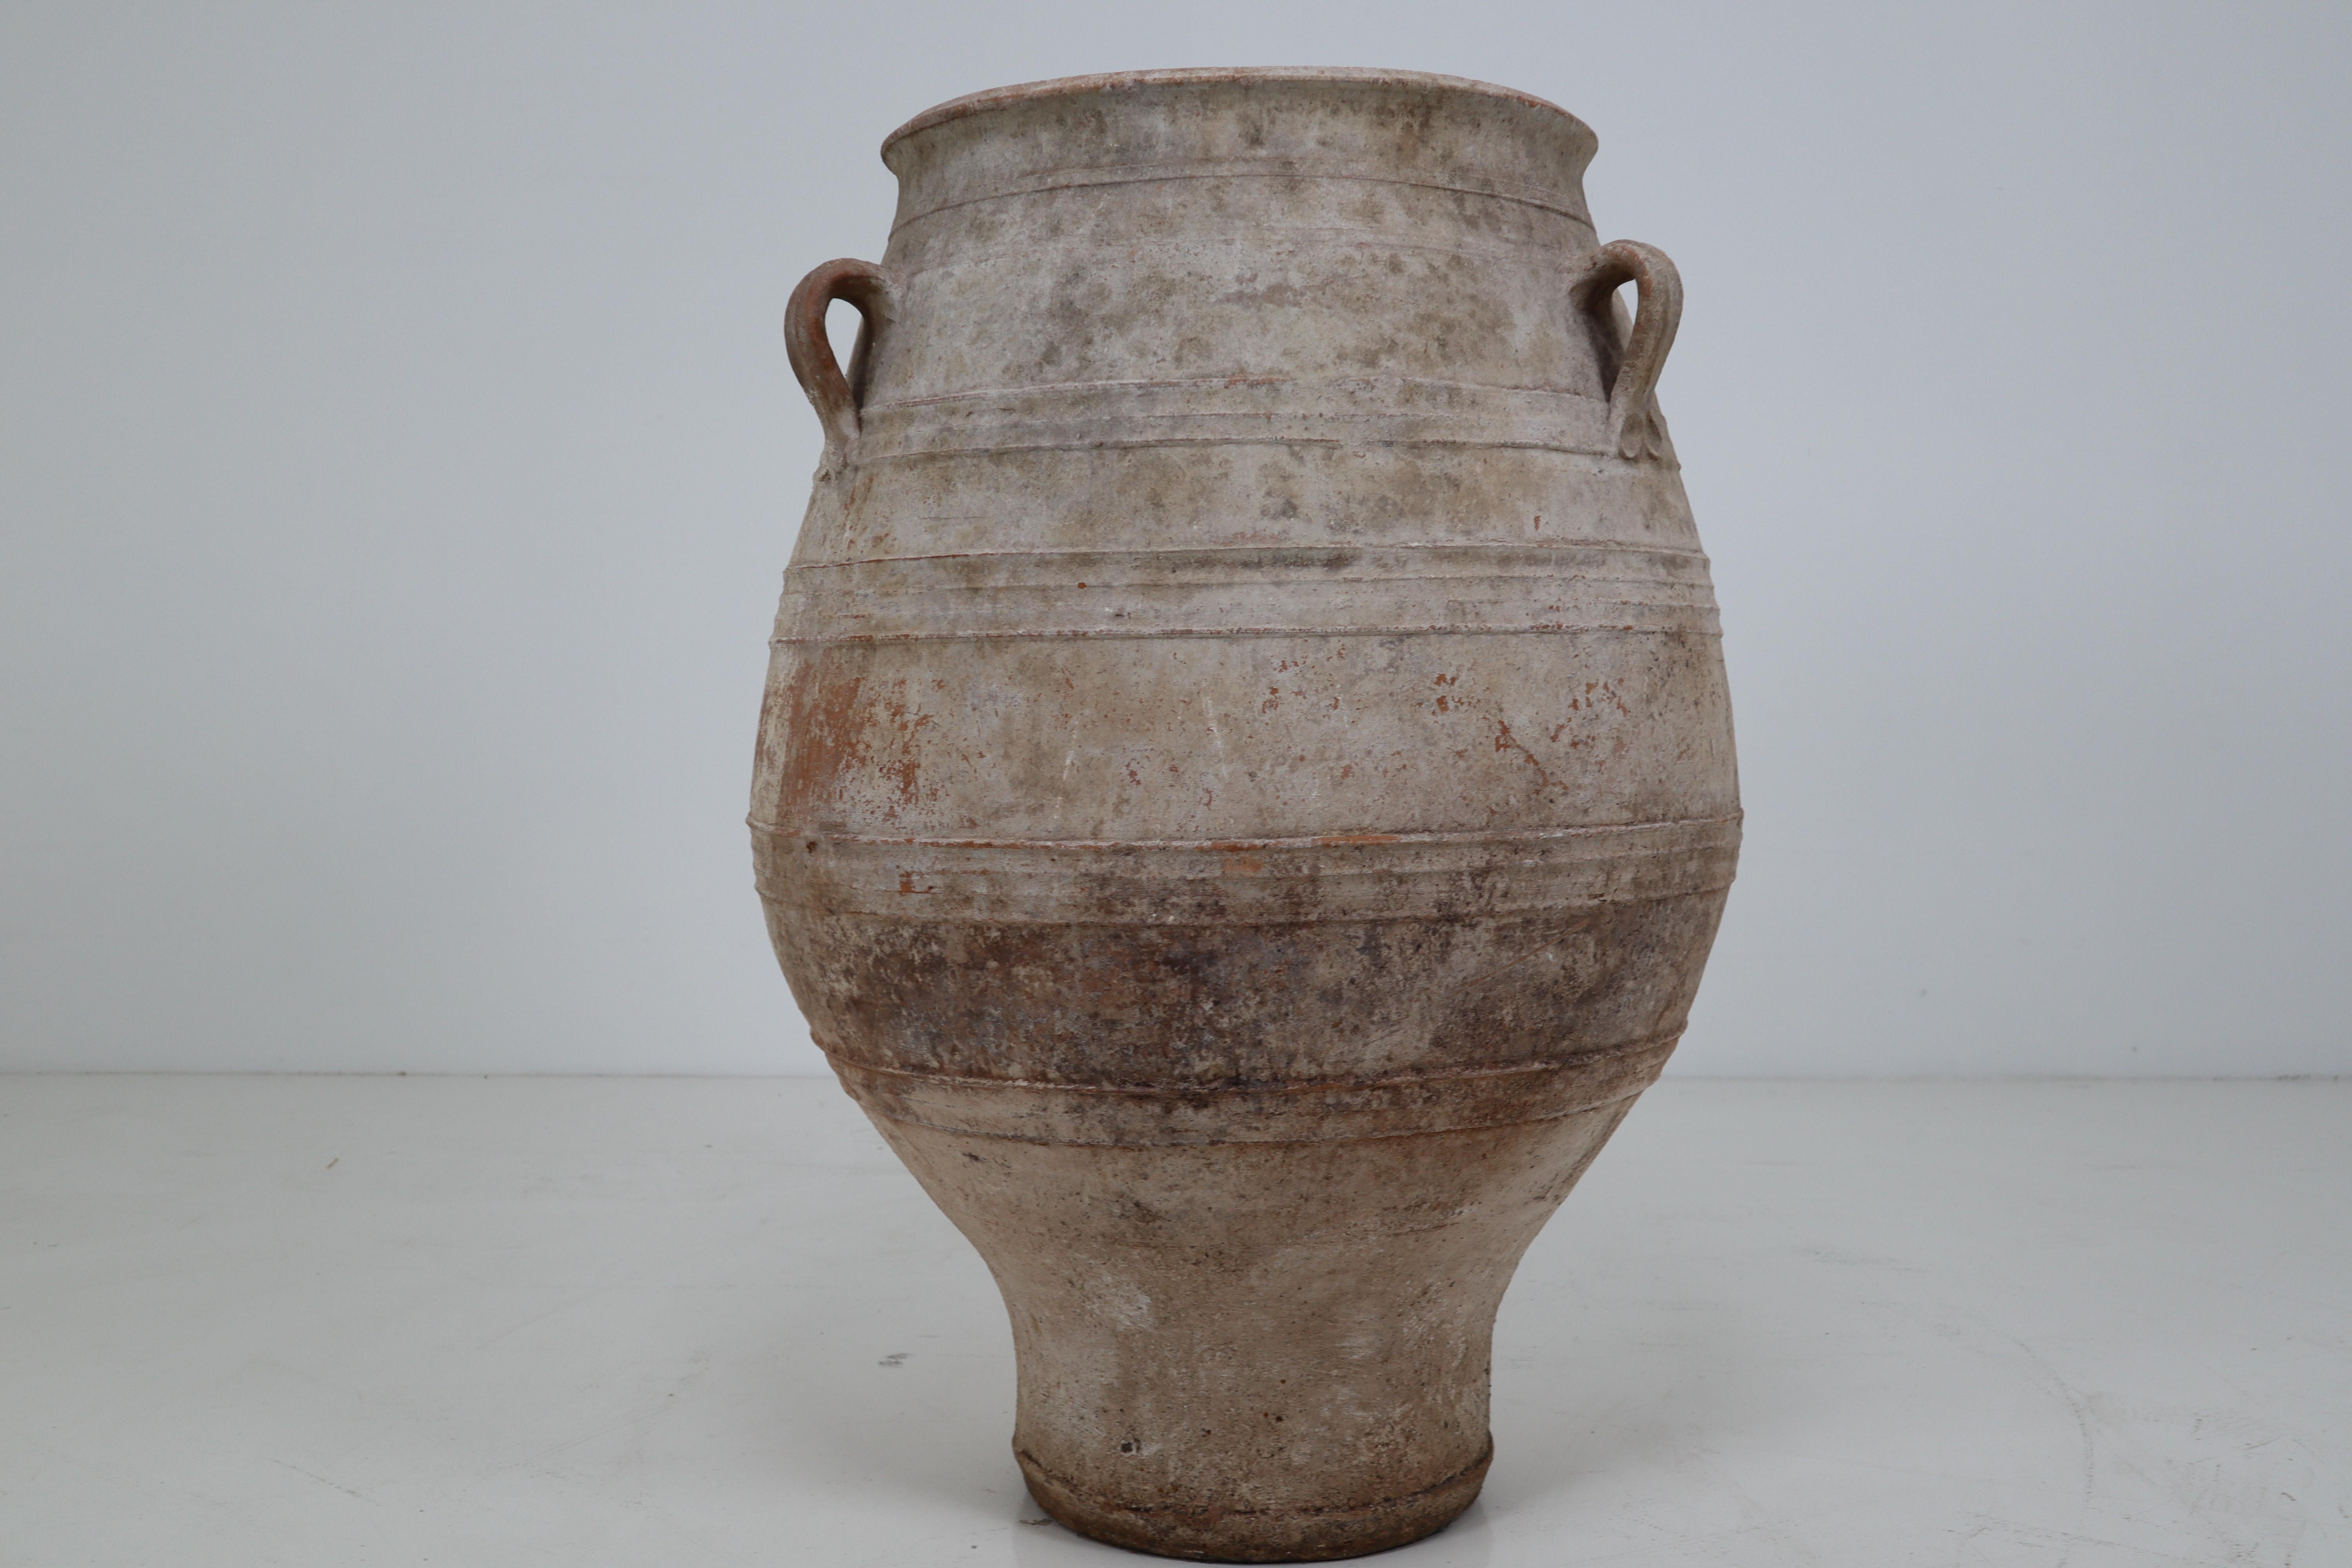 A large vintage three-handled painted terracotta urn from early 20th century Greece, with white finish and rounded belly. Picture this large 1900s urn in its former life, on a shaded terrace under an olive tree overlooking the Mediterranean Sea in